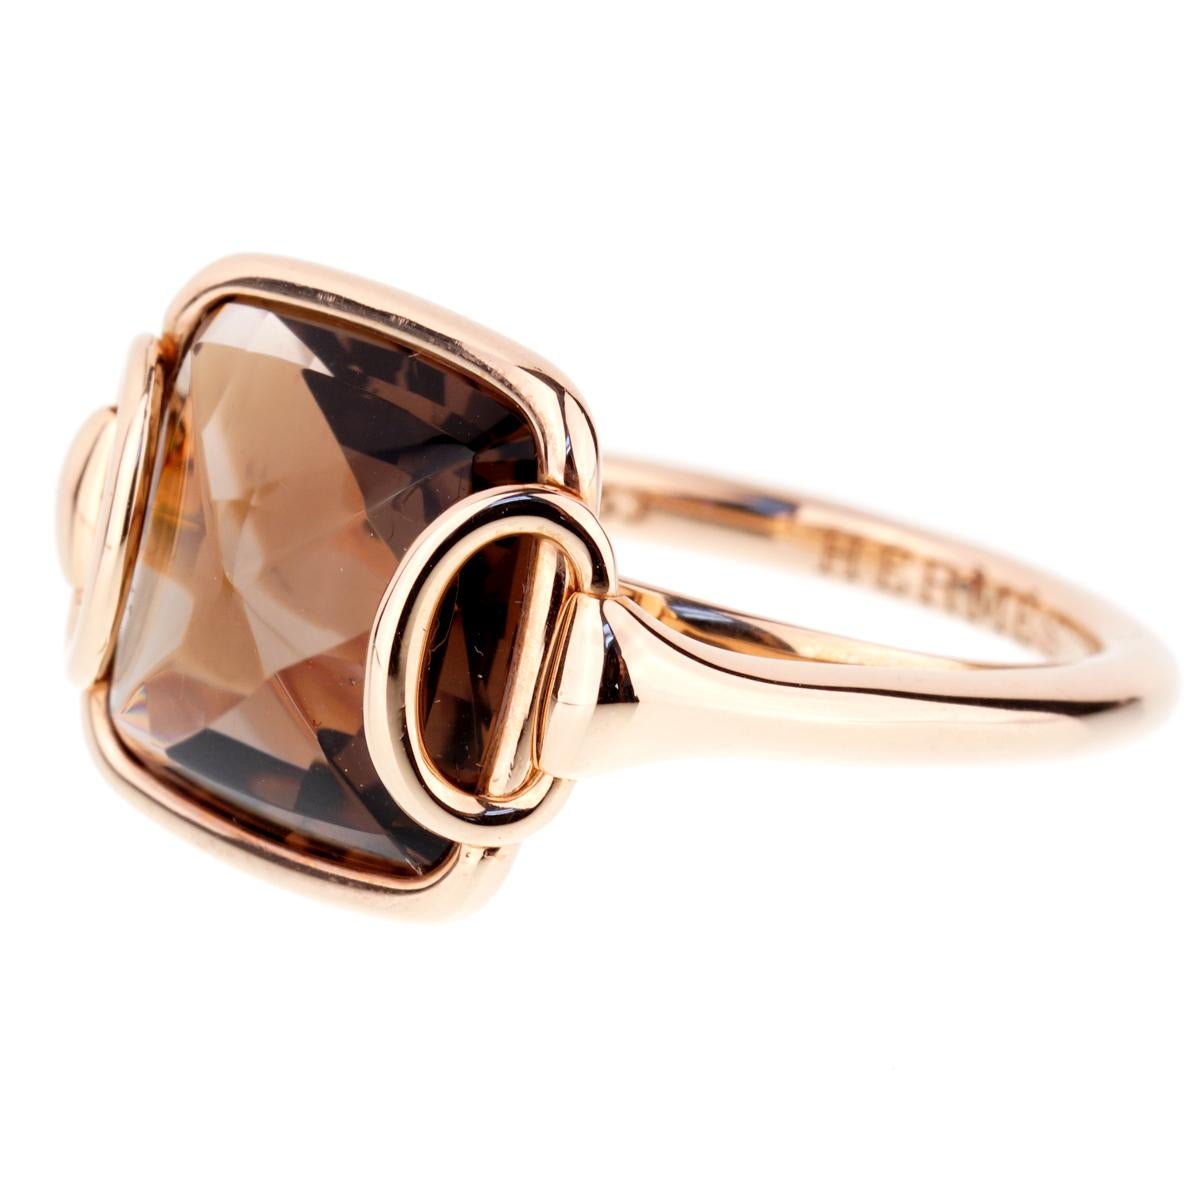 A chic Hermes ring from the Deux Anneaux featuring a Smoky Quartz wrapped in luxurious 18k rose gold. The ring measures .55